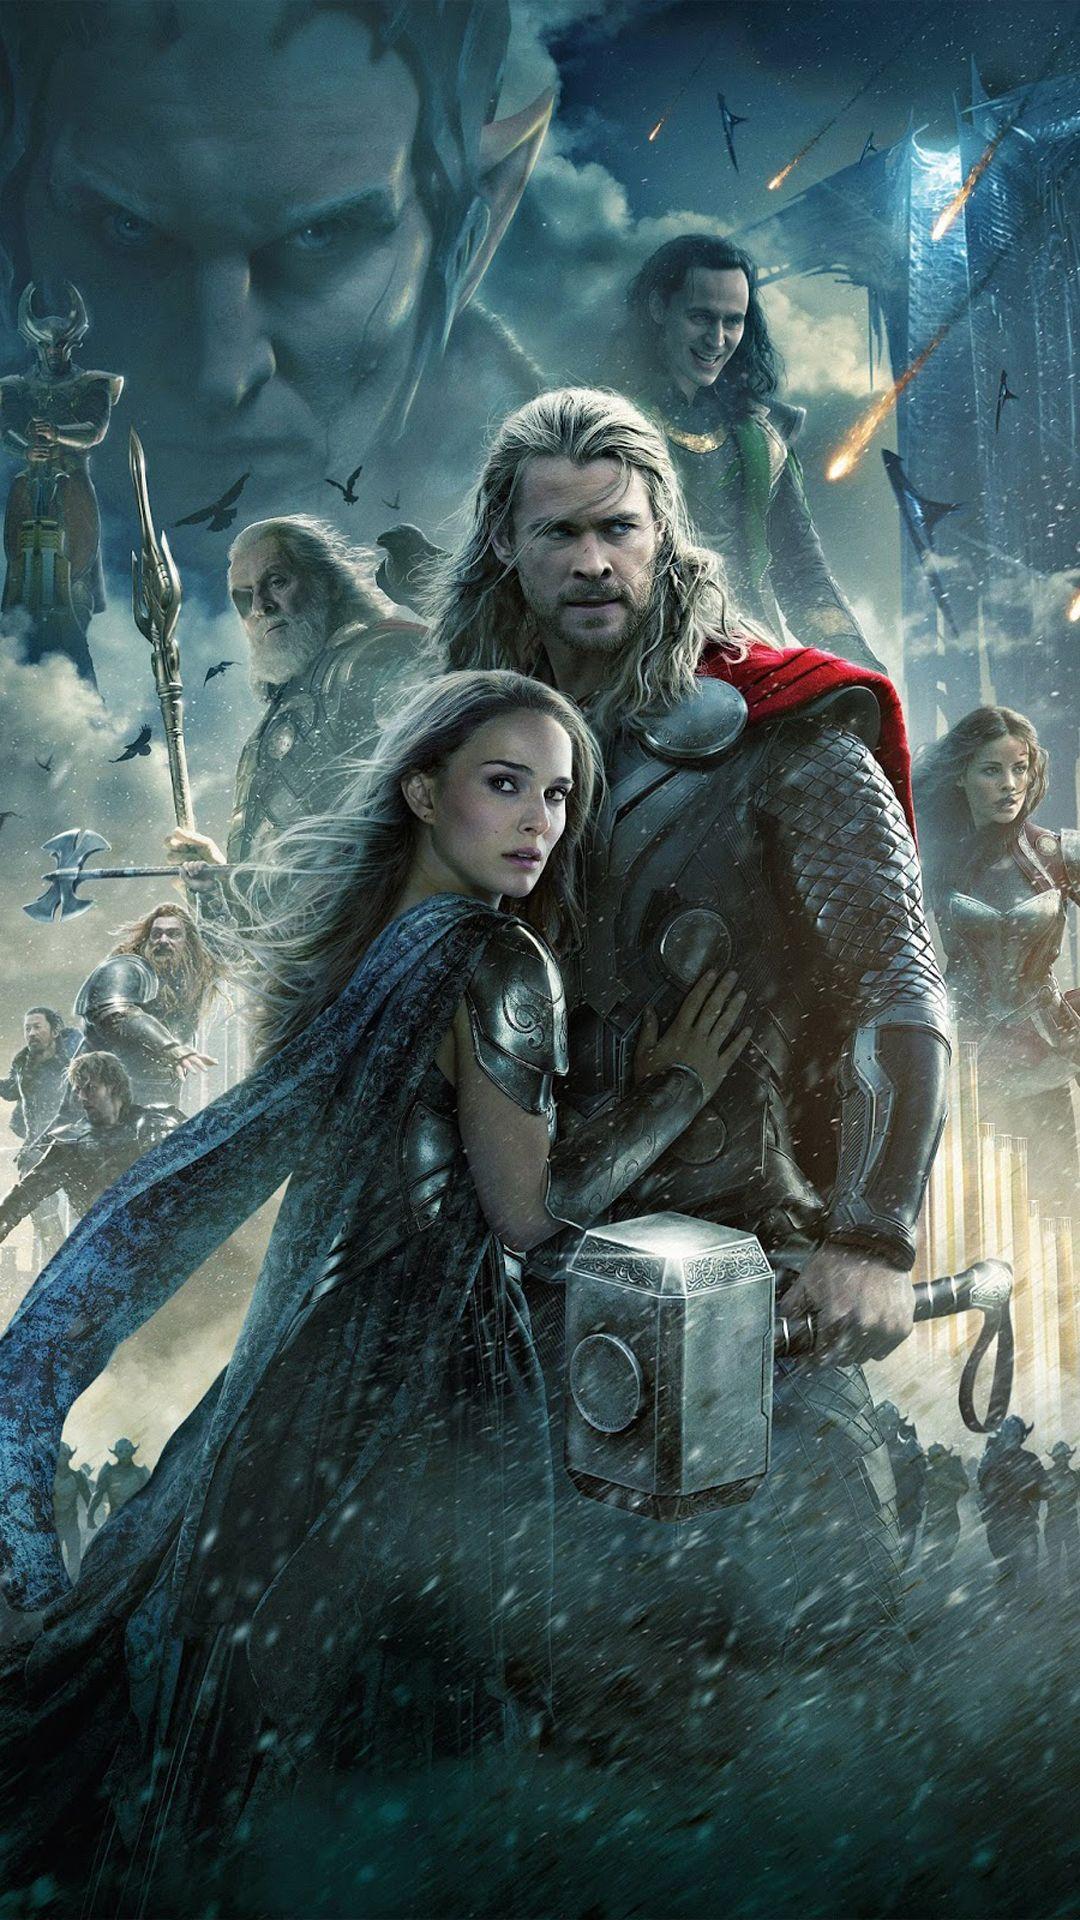 Thor The Dark World htc one wallpaper, free and easy to download